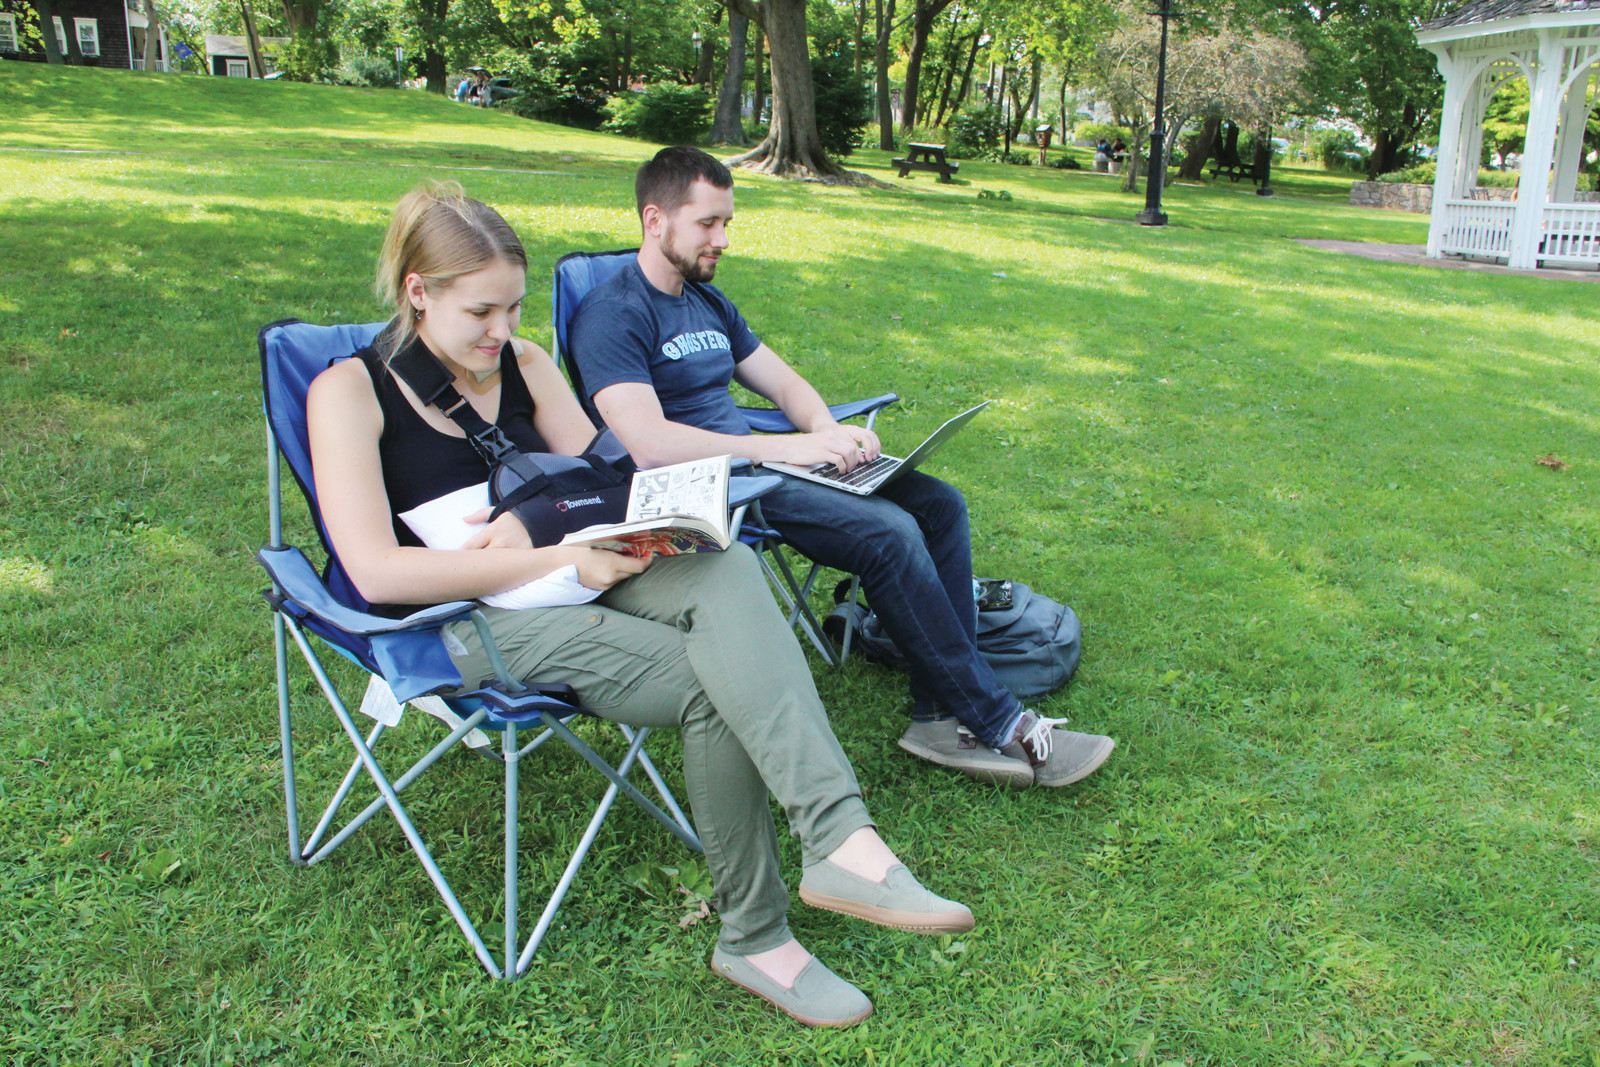 TWO FORMS OF PRINT: Amy Elsberger and Dave Counts found Pawtuxet Park as a good spot to do some book and computer screen reading Sunday.